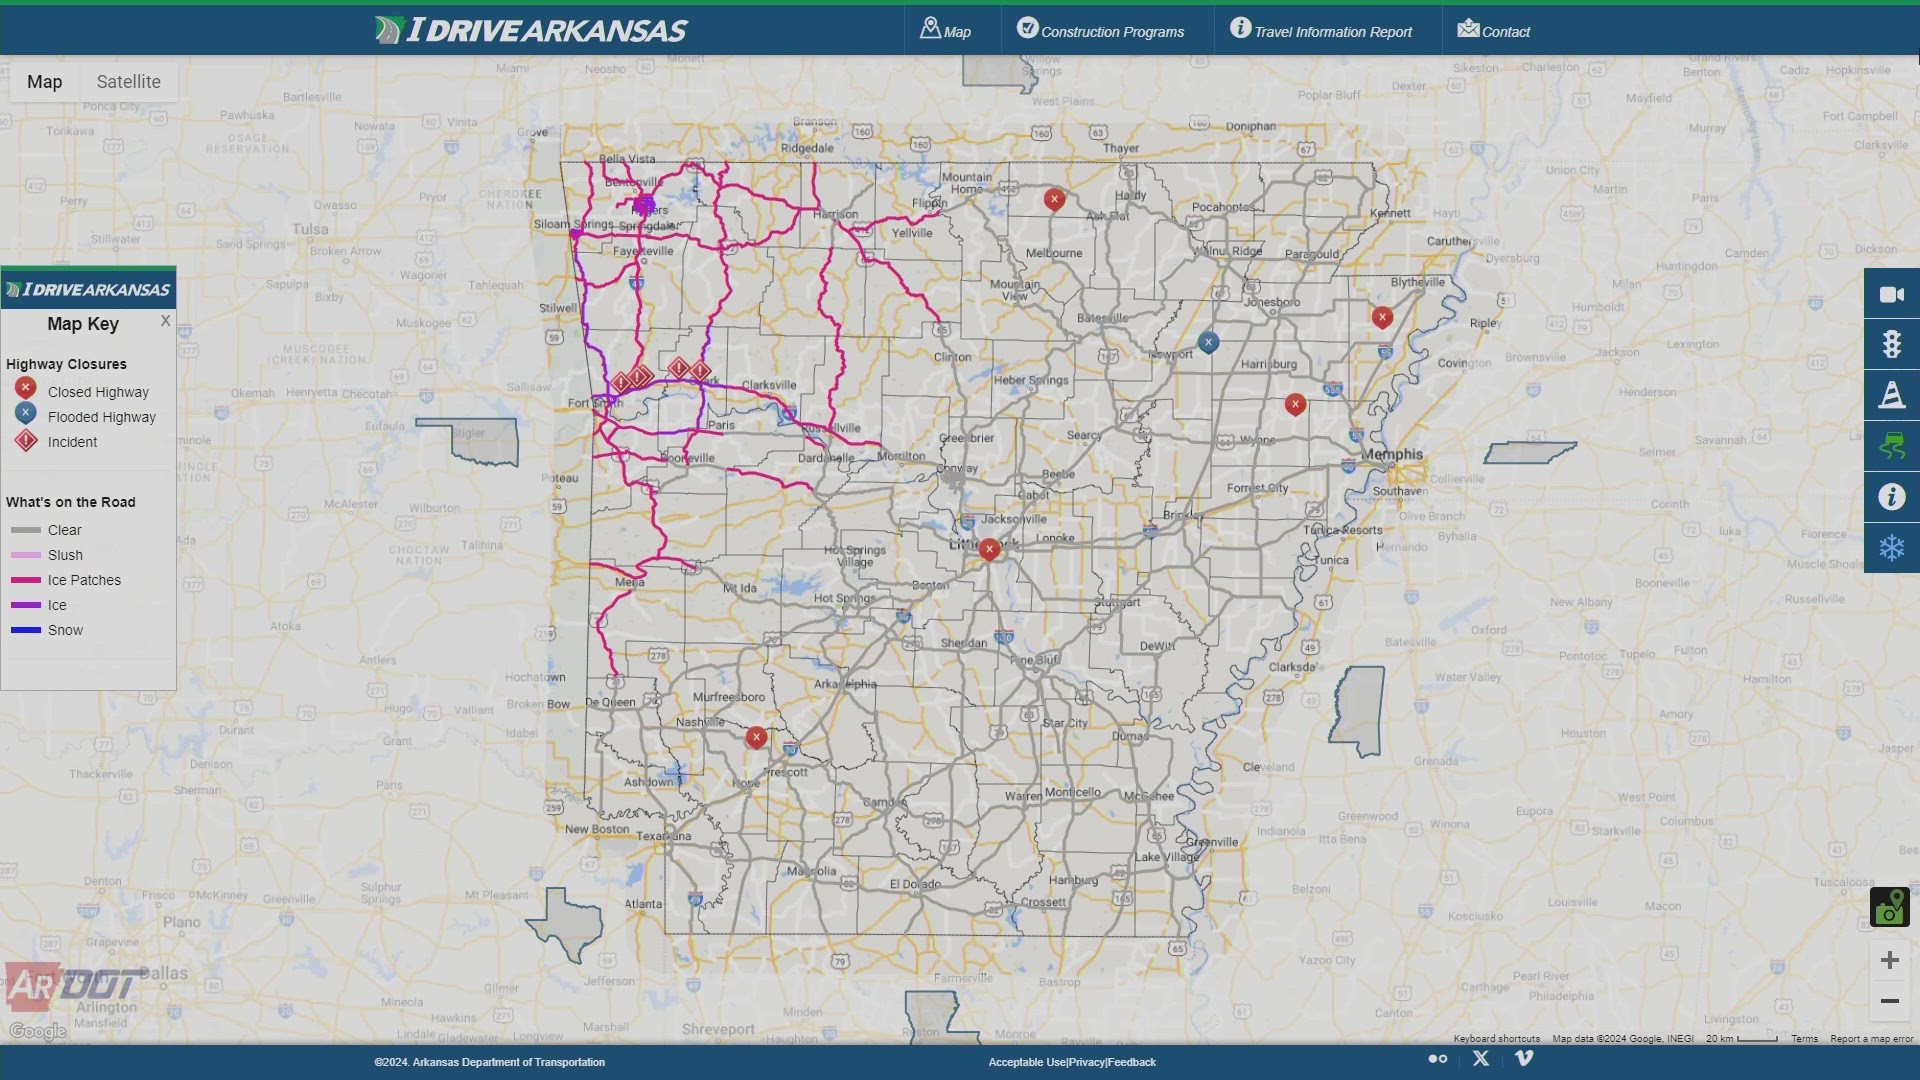 Watch the video to learn about the road conditions in Northwest Arkansas and the River valley ice covers roads and major highways.